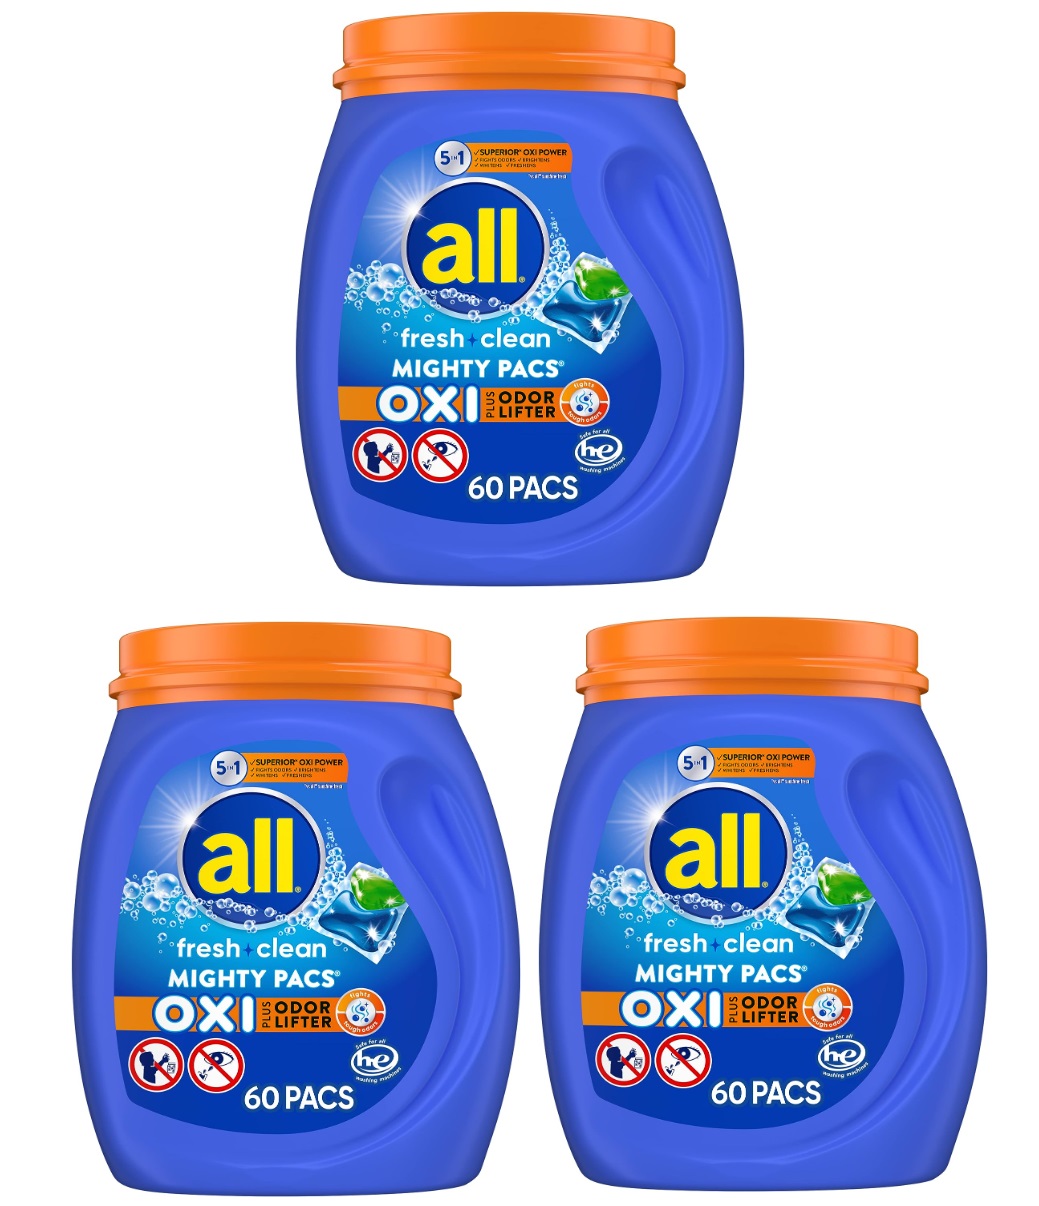 60-Count all Fresh Clean Oxi Plus Odor Lifter Laundry Detergent Pacs: 1 for $9.74 or 3 for $24.42 ($8.14 each) w/ S&S + Free Shipping